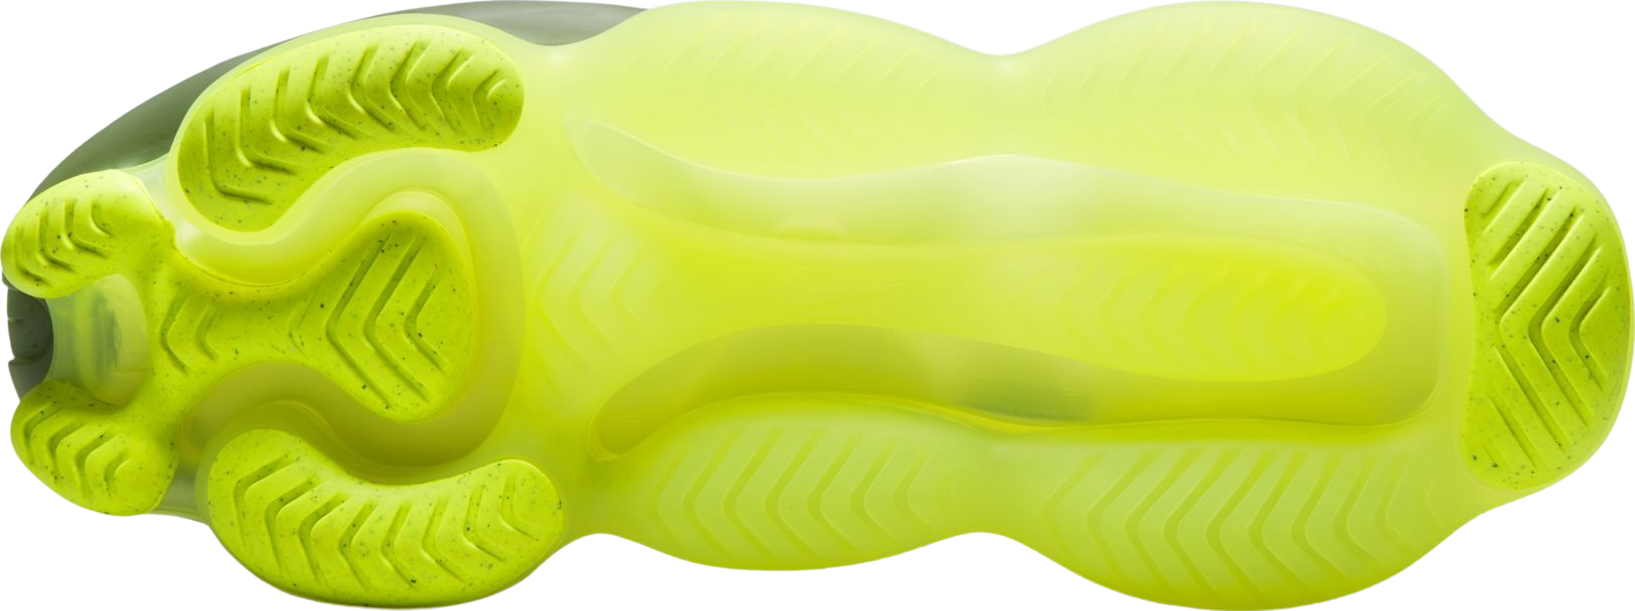 Nike Air Max Scorpion Barely Volt